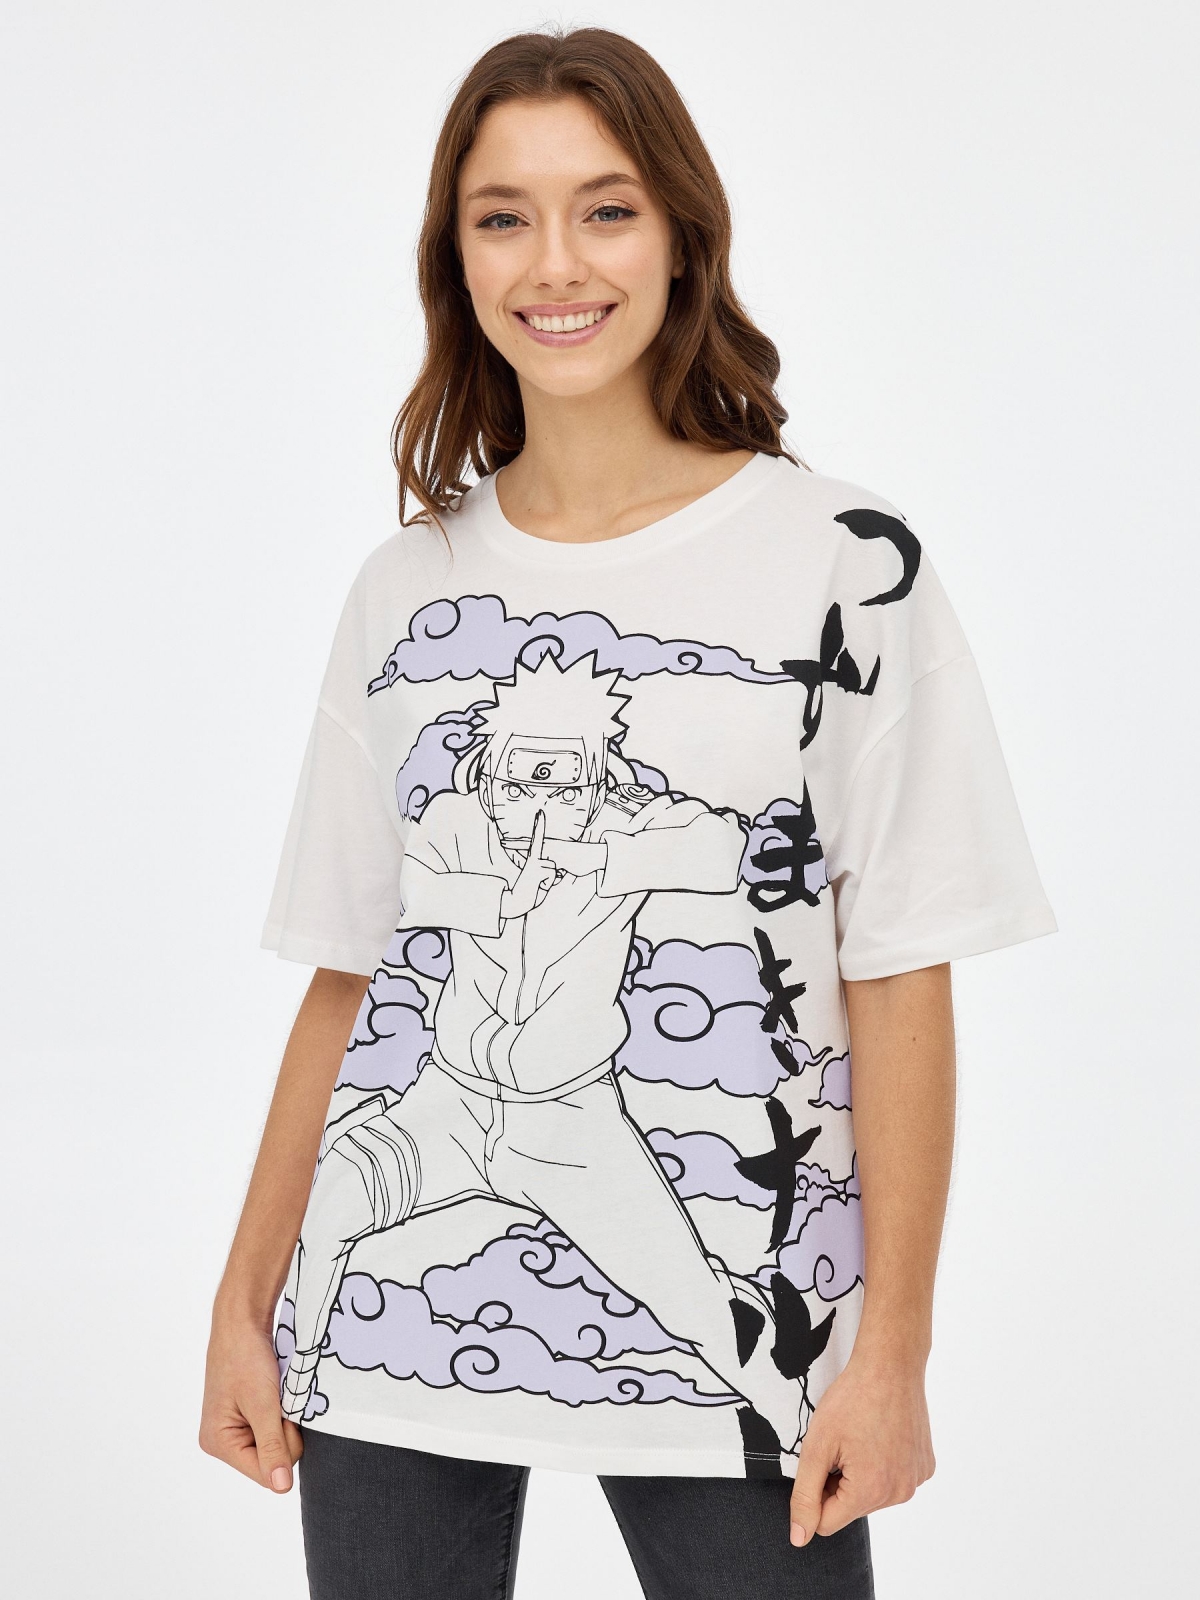 Naruto oversize t-shirt off white middle front view